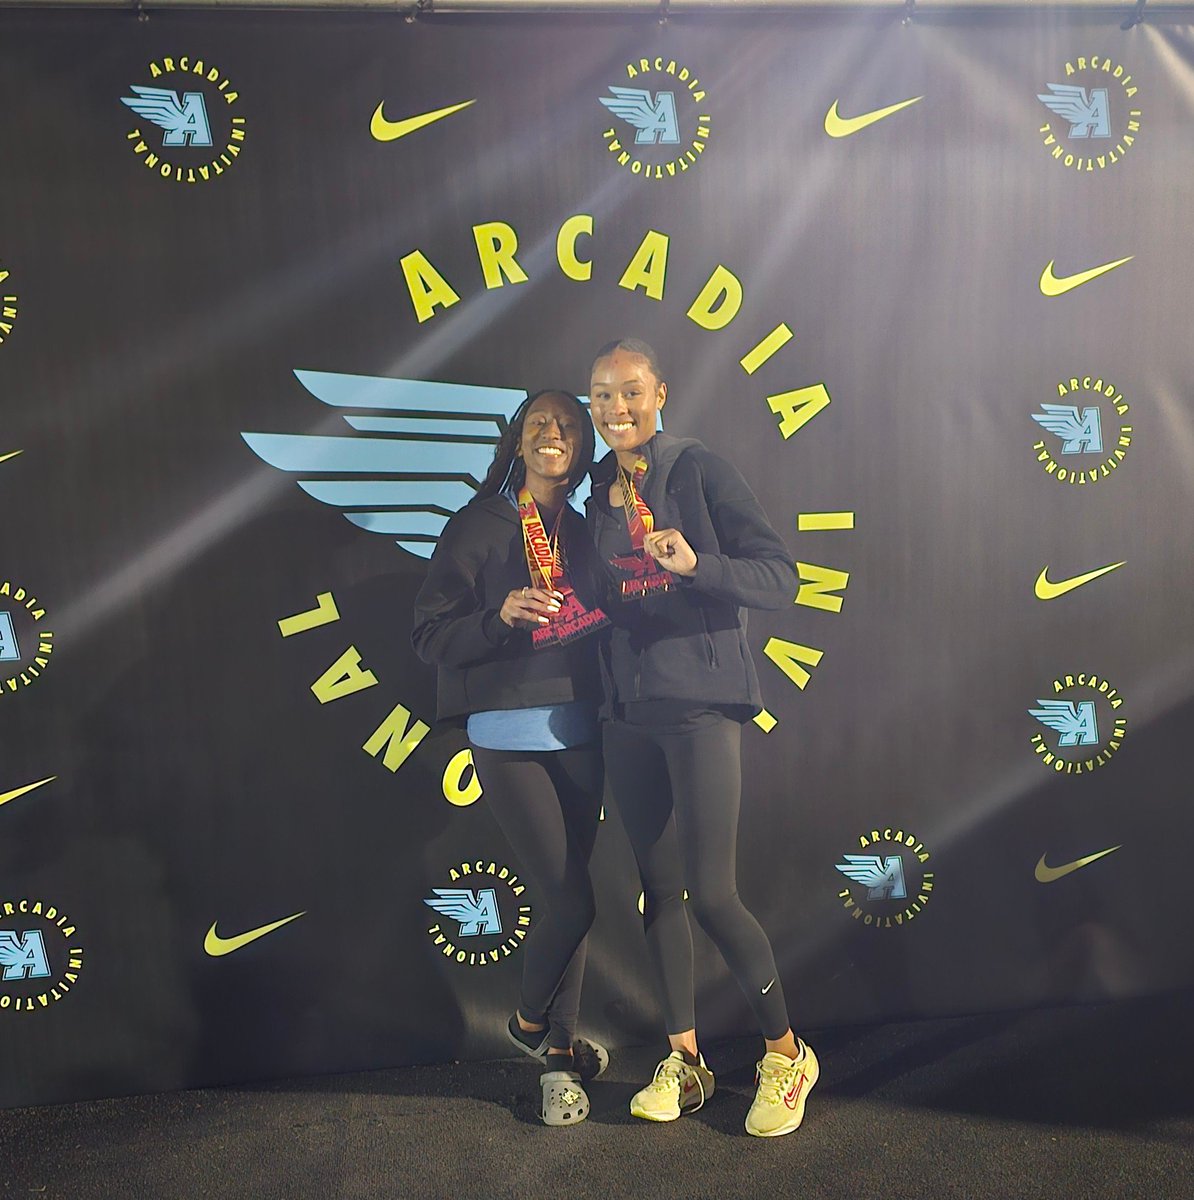 The Colorado Super Duo - among the best in the country! Kaeli Powe and Gabriela Cunningham. Powe - 39-03.25 in Invitational TJ. Cunningham - 42.52s in Invitational 300mIH